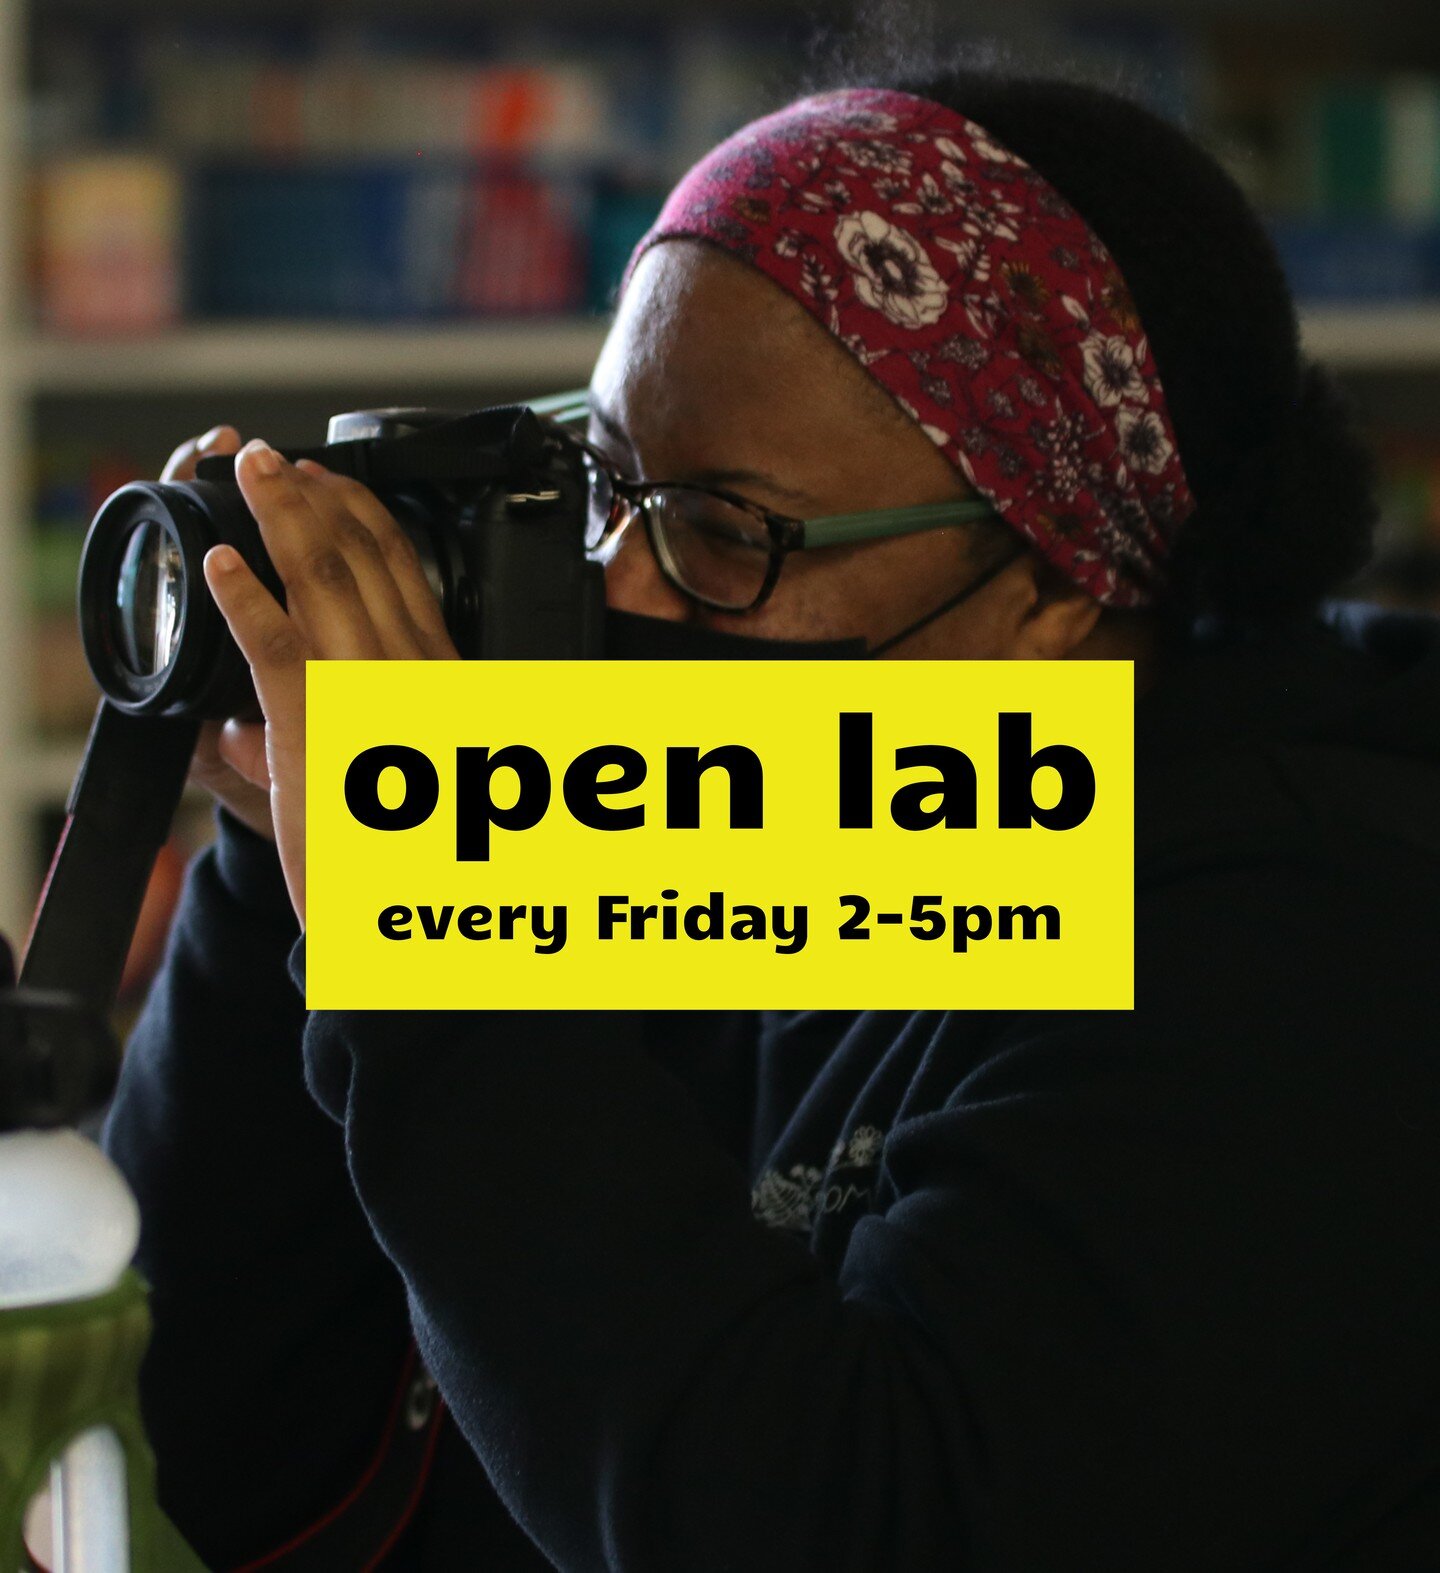 Drop by tomorrow, Friday, May 19th, for open lab from 2-5pm. This is a free, peer mentor-led supportive environment to work on projects, edit, get gear, and feedback. 

&gt; For youth ages 16-25
&gt; No experience needed
&gt; Free food 
&gt; Creative